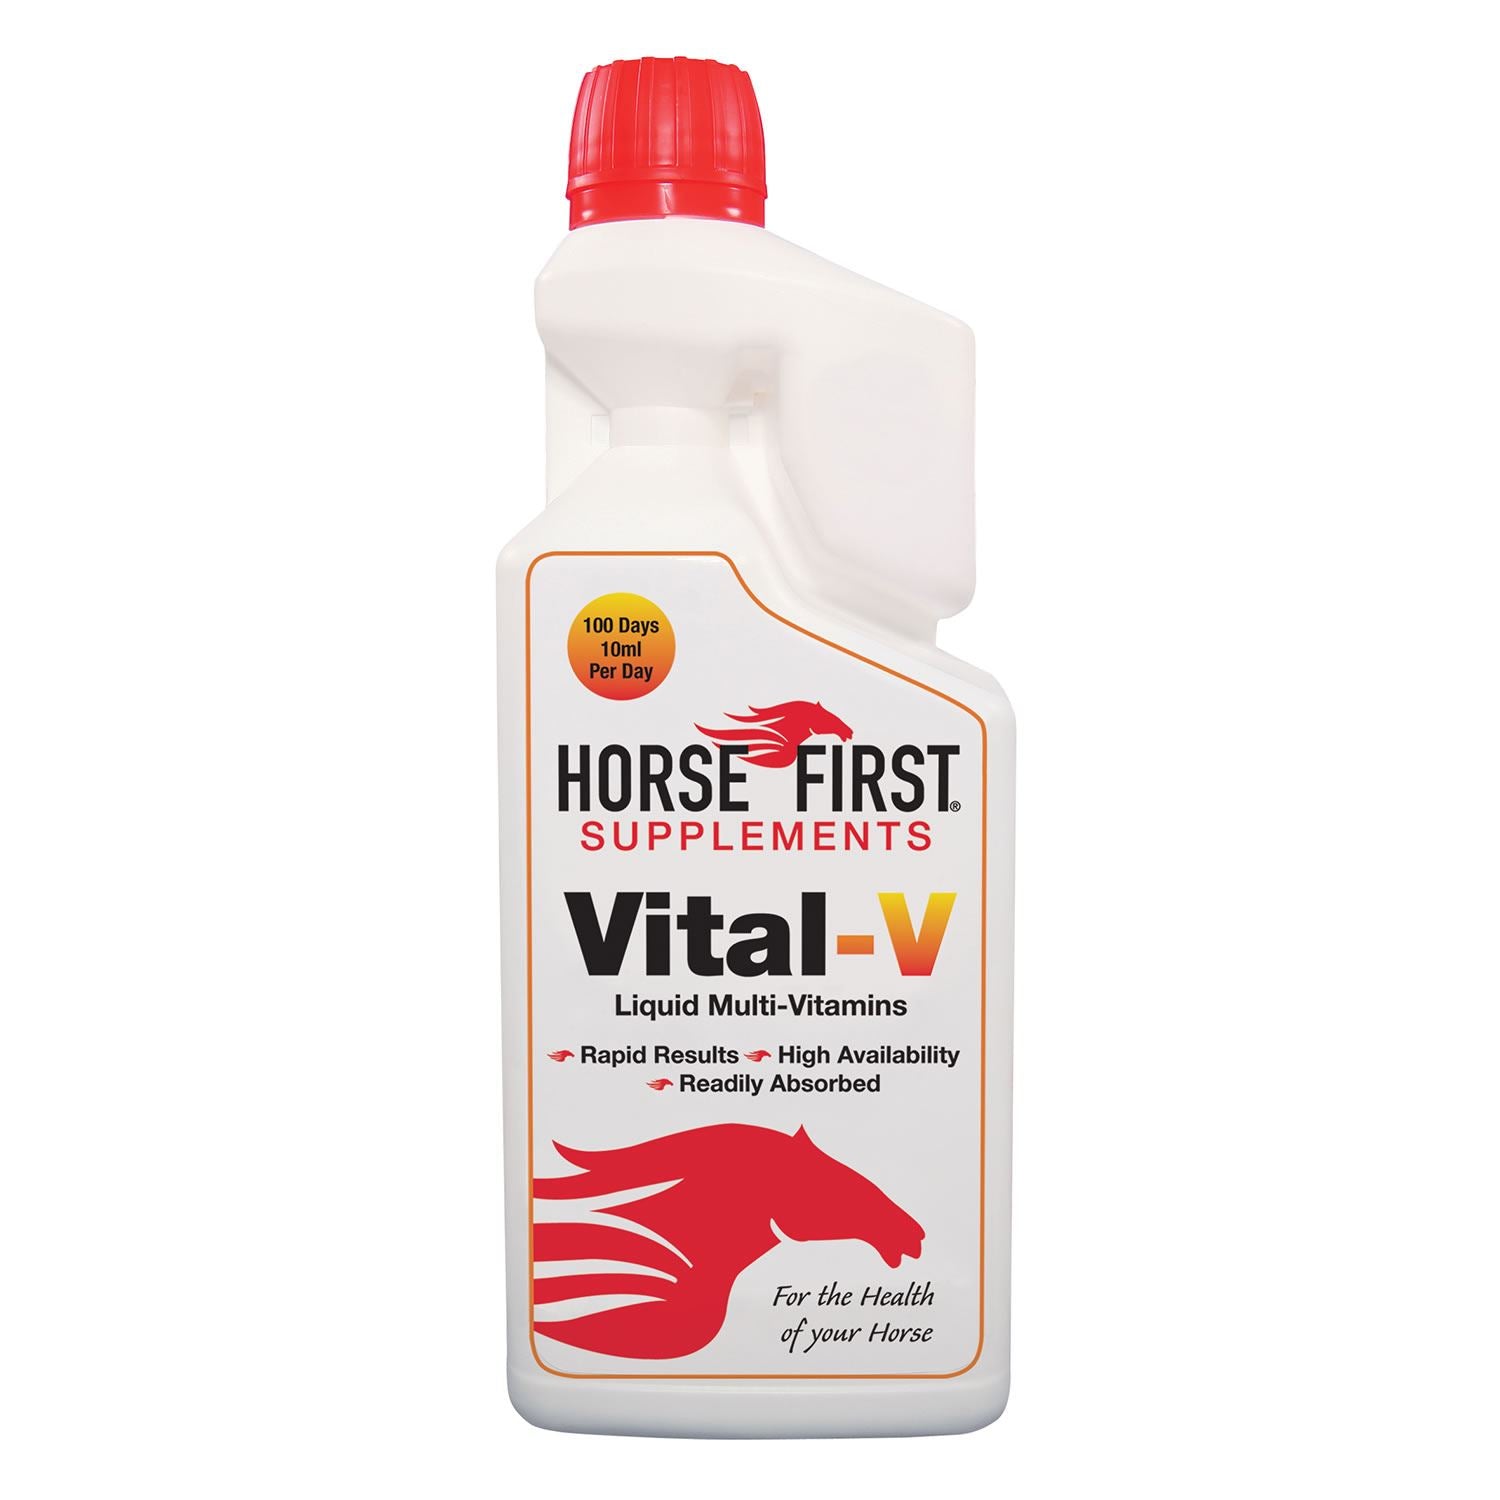 HORSE FIRST Vital-V provides horses and ponies with the correct major vitamin requirement in an easily absorbed solution, producing rapid results.